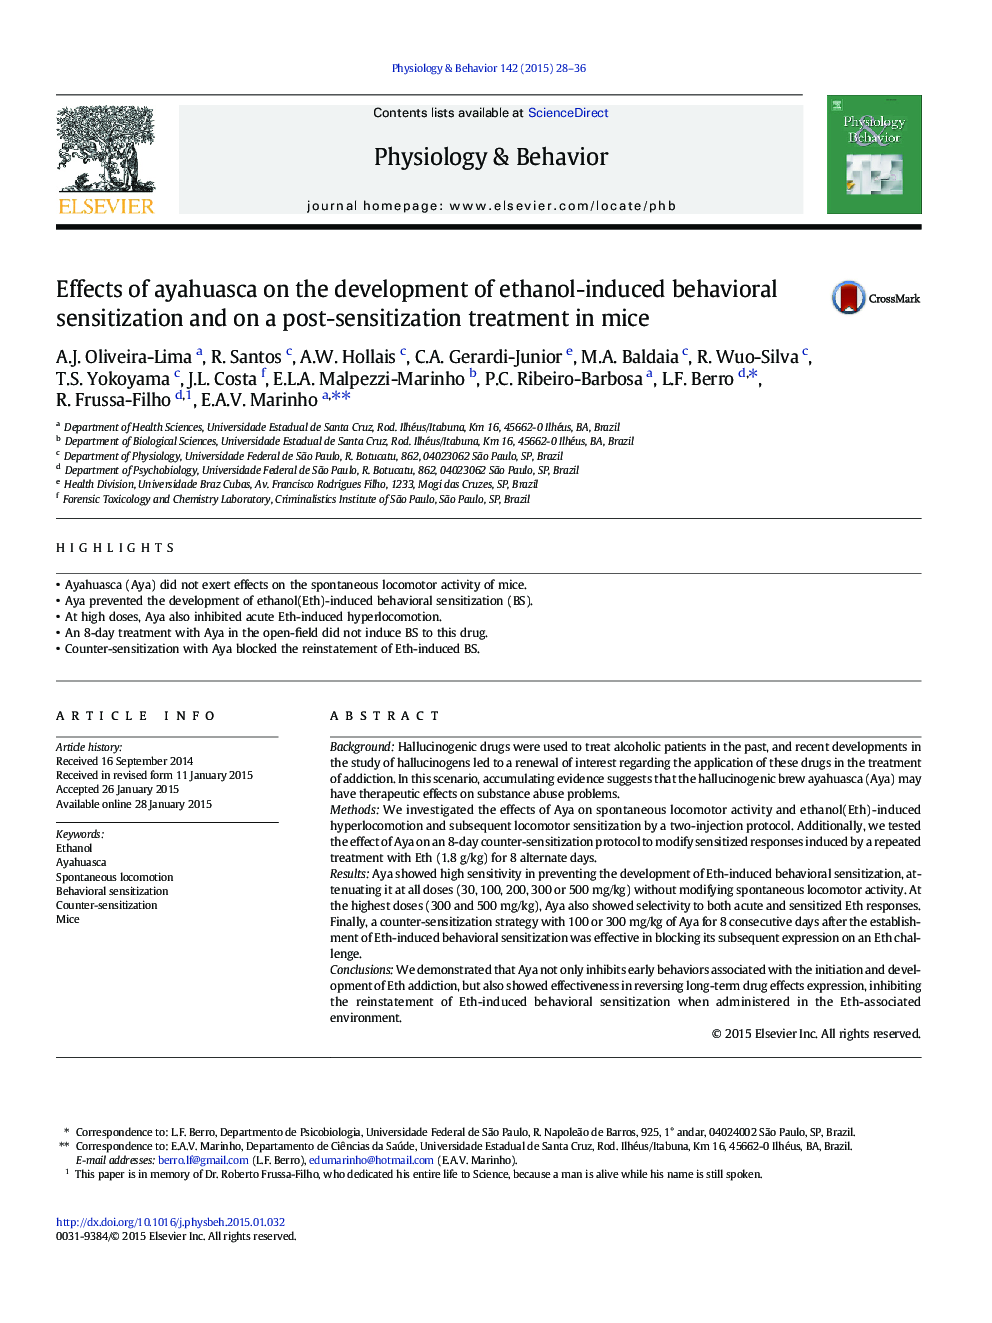 Effects of ayahuasca on the development of ethanol-induced behavioral sensitization and on a post-sensitization treatment in mice